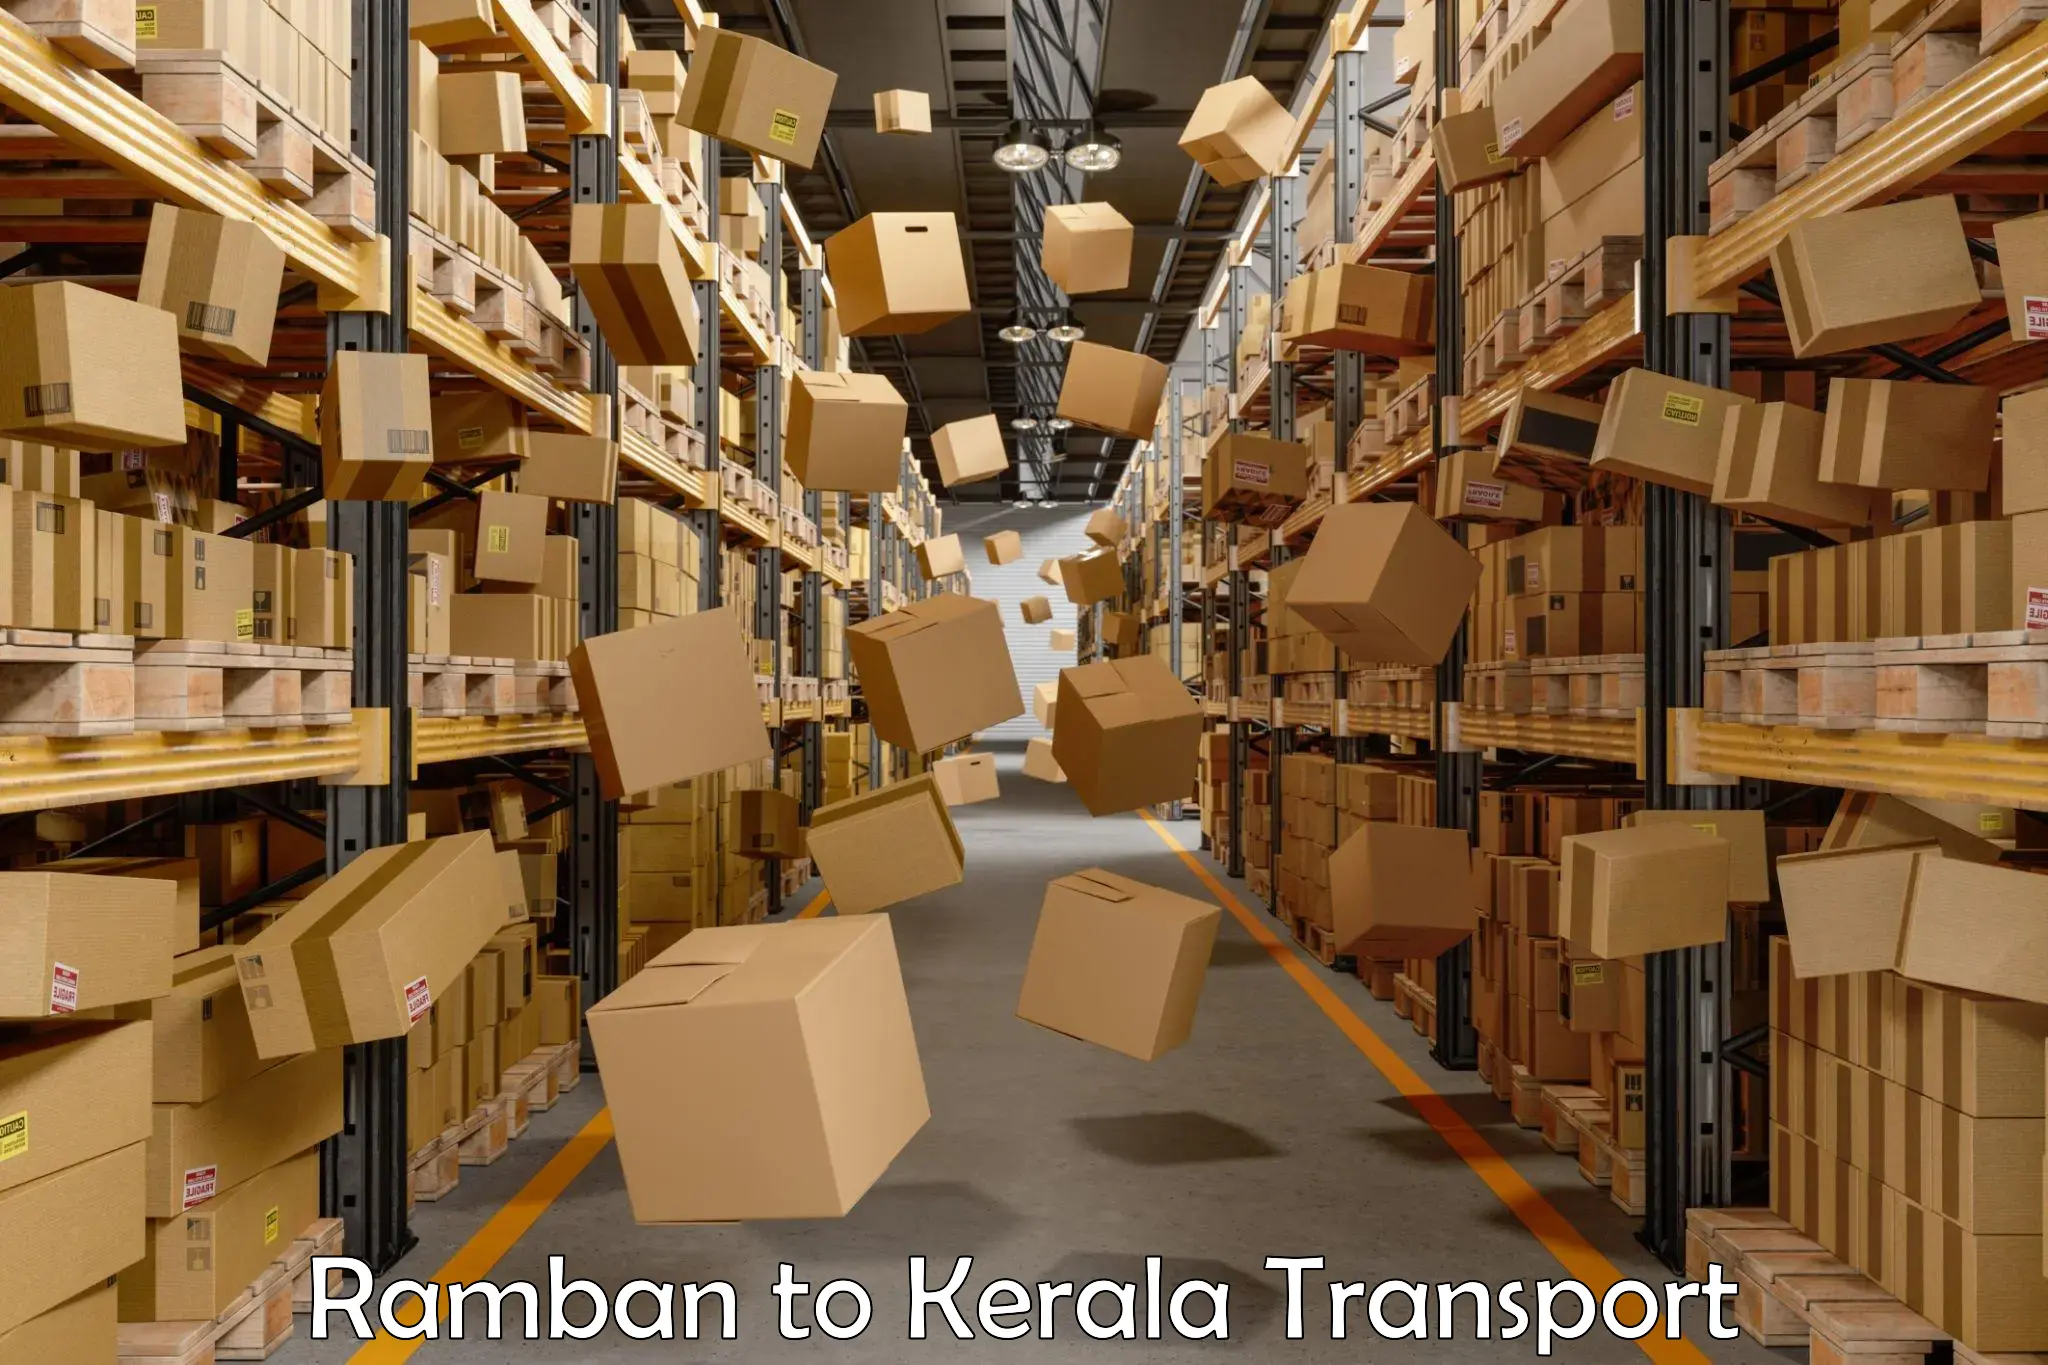 Truck transport companies in India Ramban to Angamaly